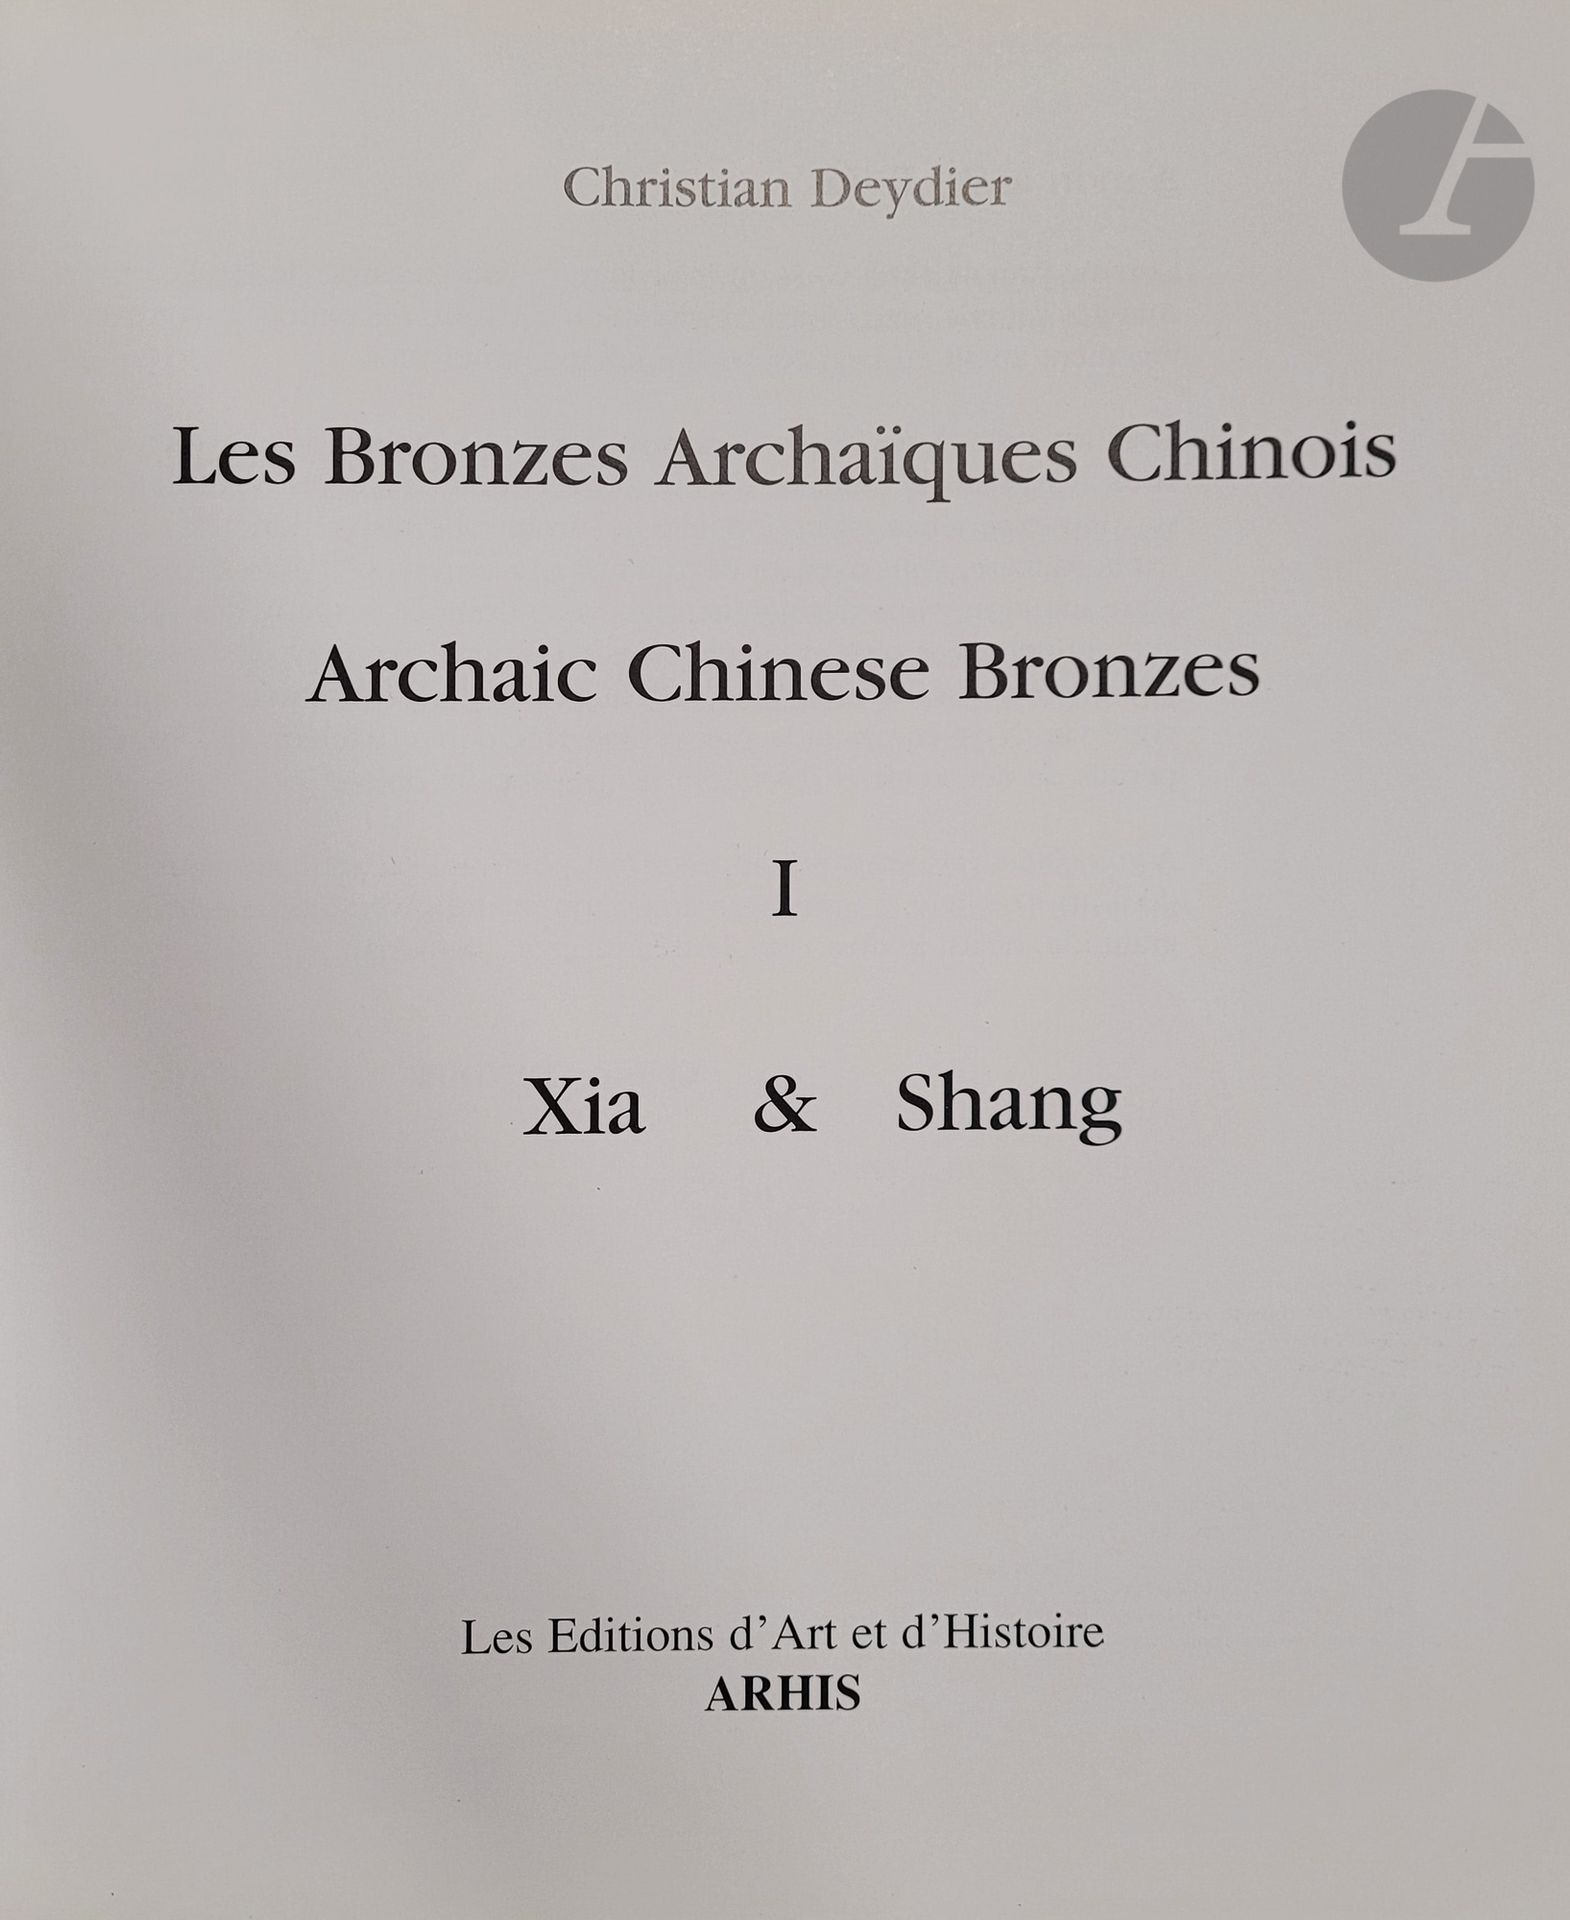 Null CHINA - BRONCE] 
Siete libros:
- Deydier C., Les bronzes chinois, Office du&hellip;